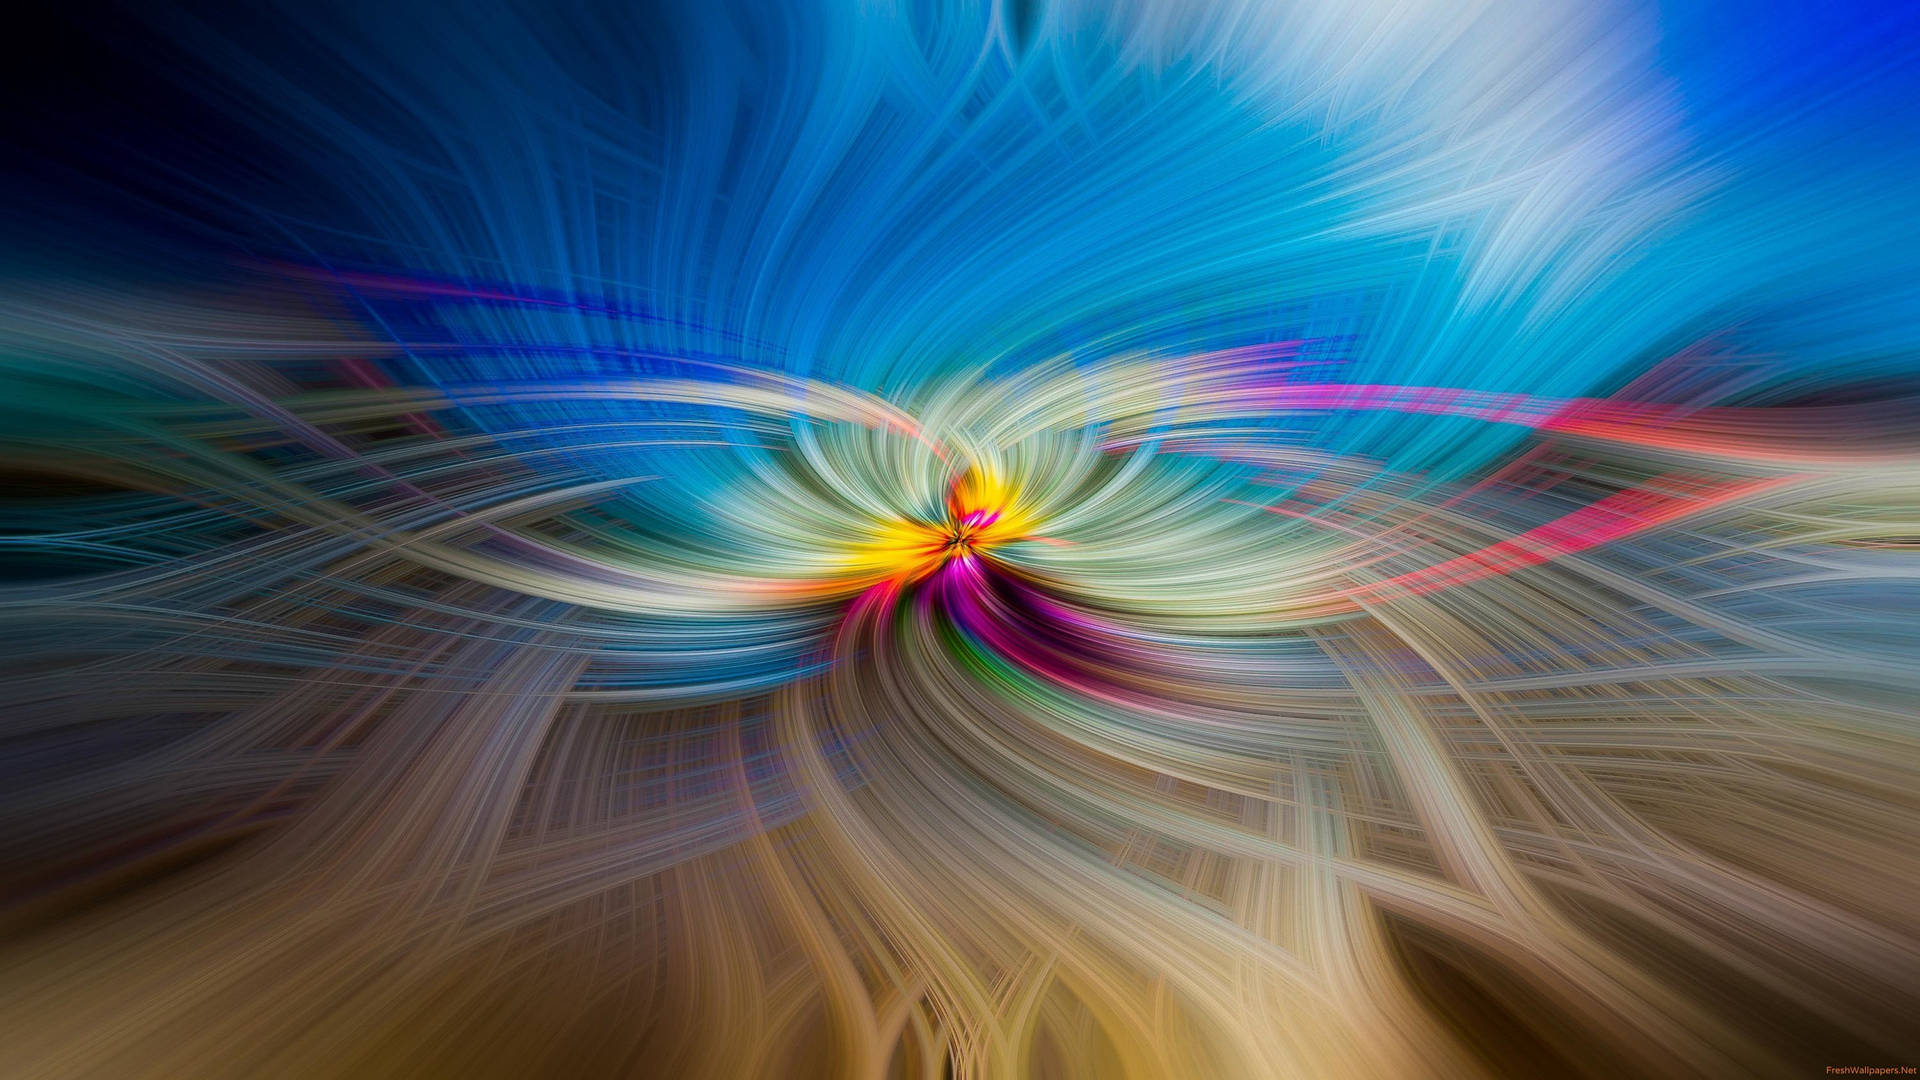 4k Moving Abstract Flower Design Picture